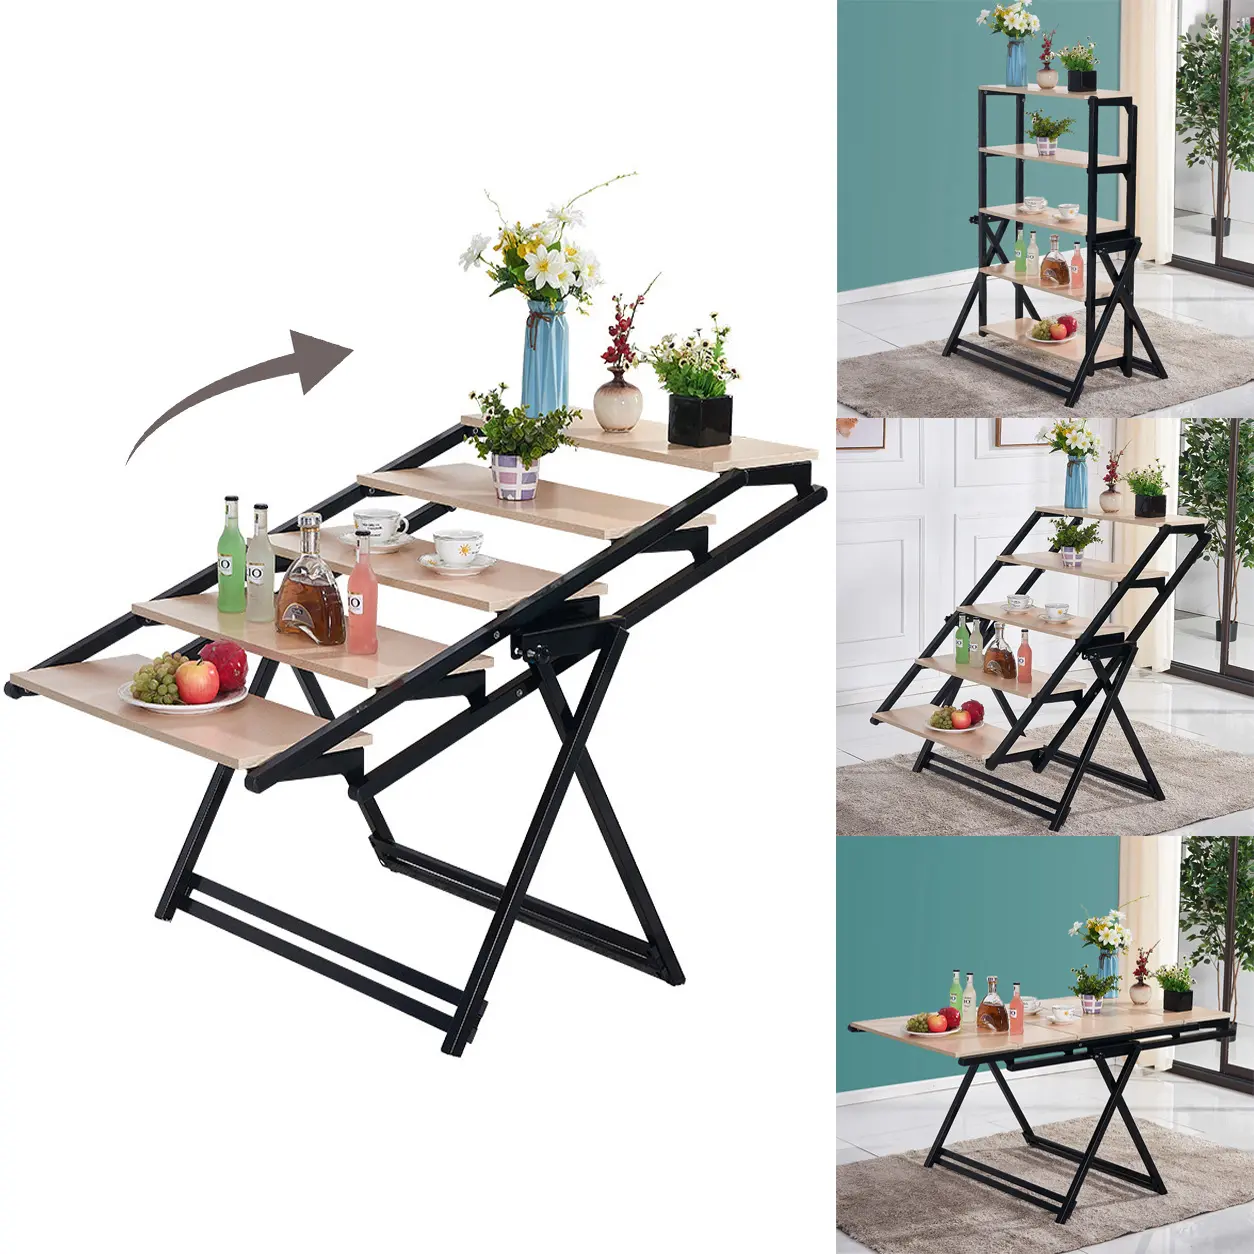 Transformable Convertible Home Furniture Smart Transforming Furniture Folding Wood Dining Table Foldable Table Shelf